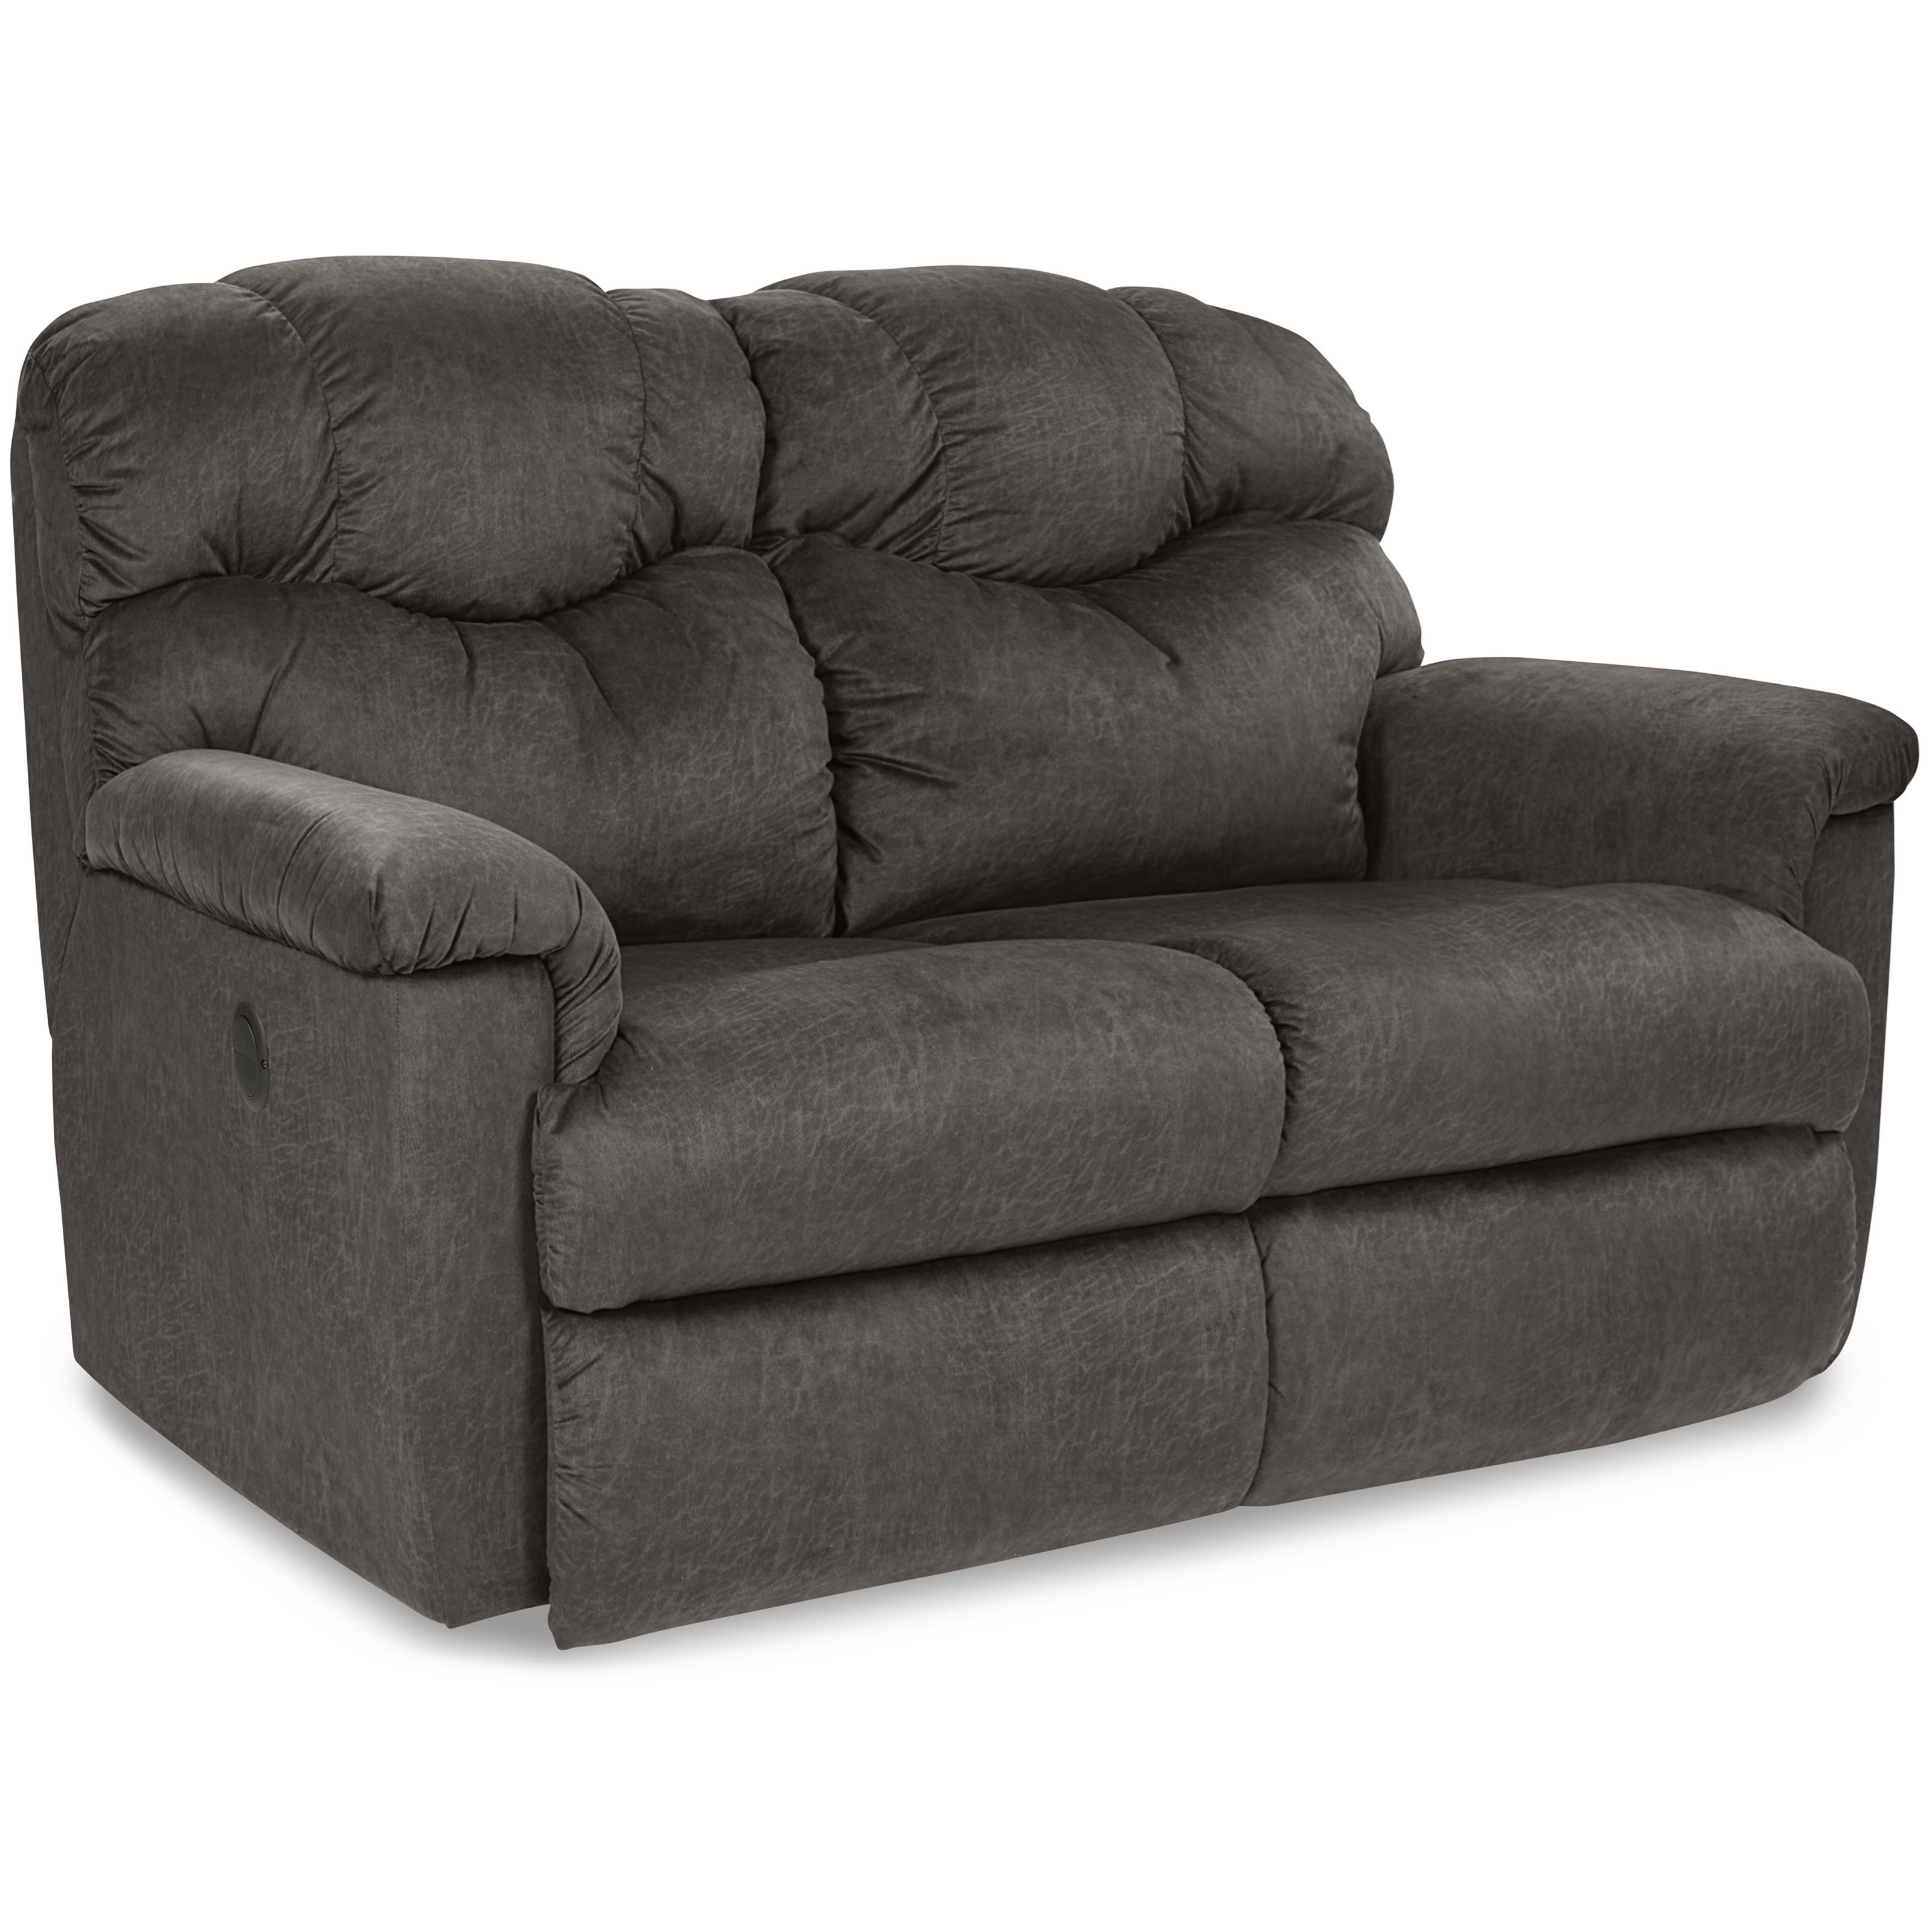 Power Reclining Loveseat with Power Headrests and USB Charging Ports